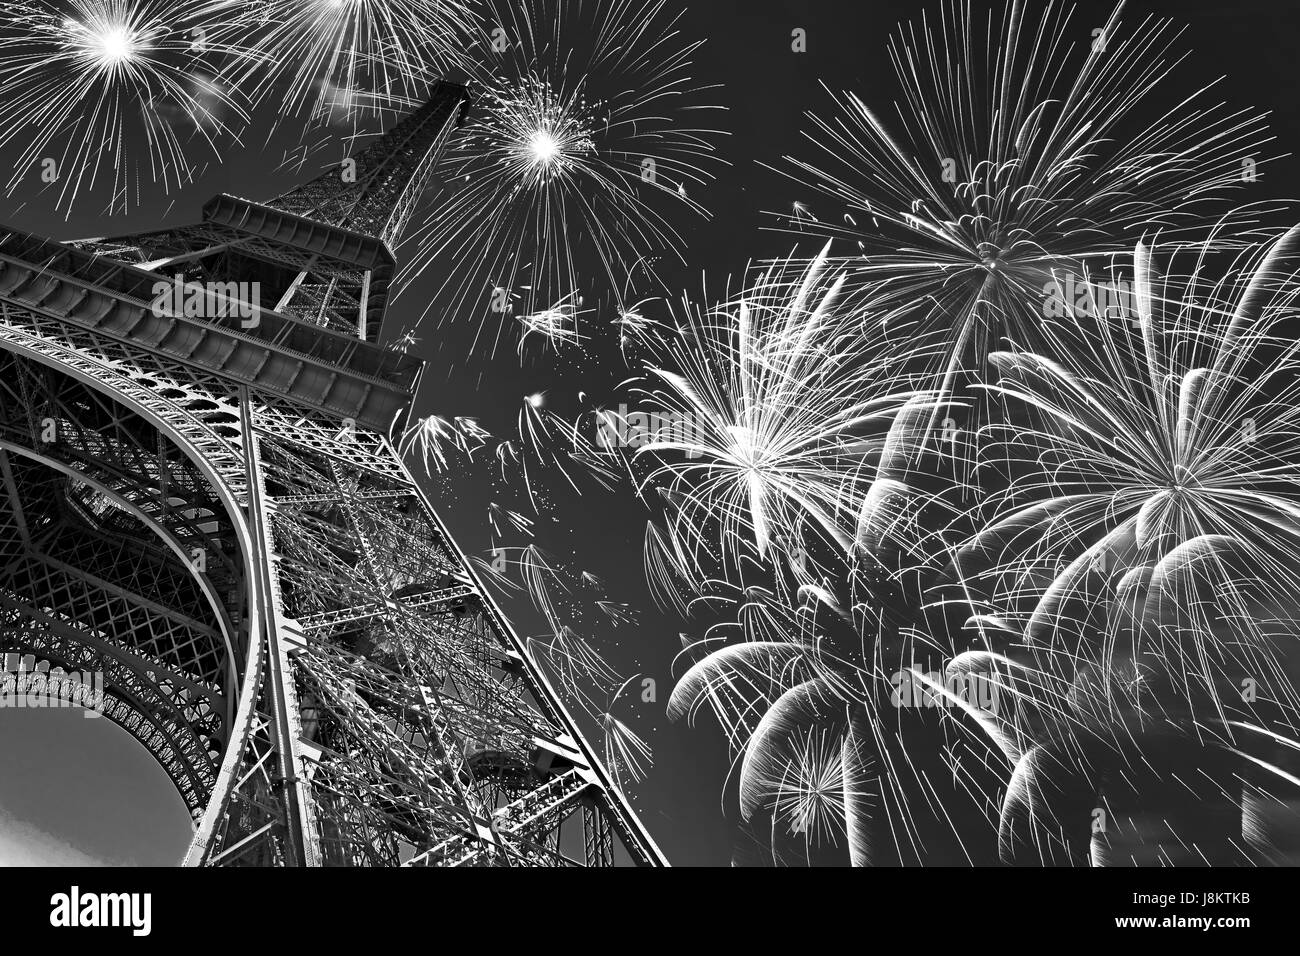 Eiffel tower at night with fireworks, french celebration and party, black and white image, Paris France Stock Photo